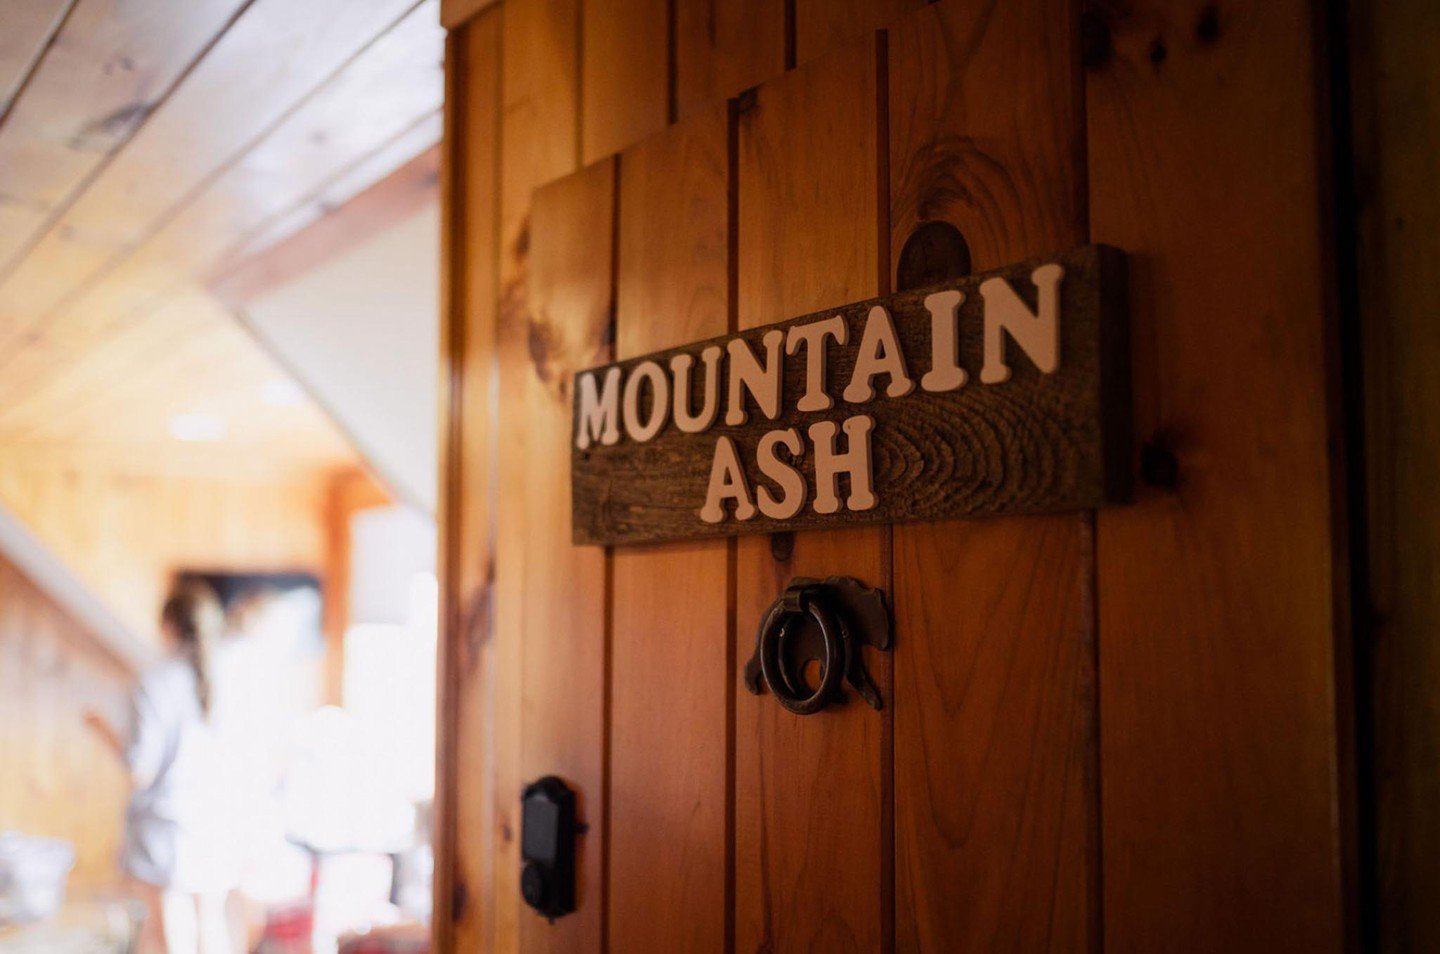 A quick glimpse into one of our most popular rooms, Mountain Ash ✨
ㅤ
With a king-sized bed overlooking Bear Pond, there's no doubt you'll love your stay here. Sit by the fireplace and enjoy a wet bar with refrigerator, coffee maker and in-room televi